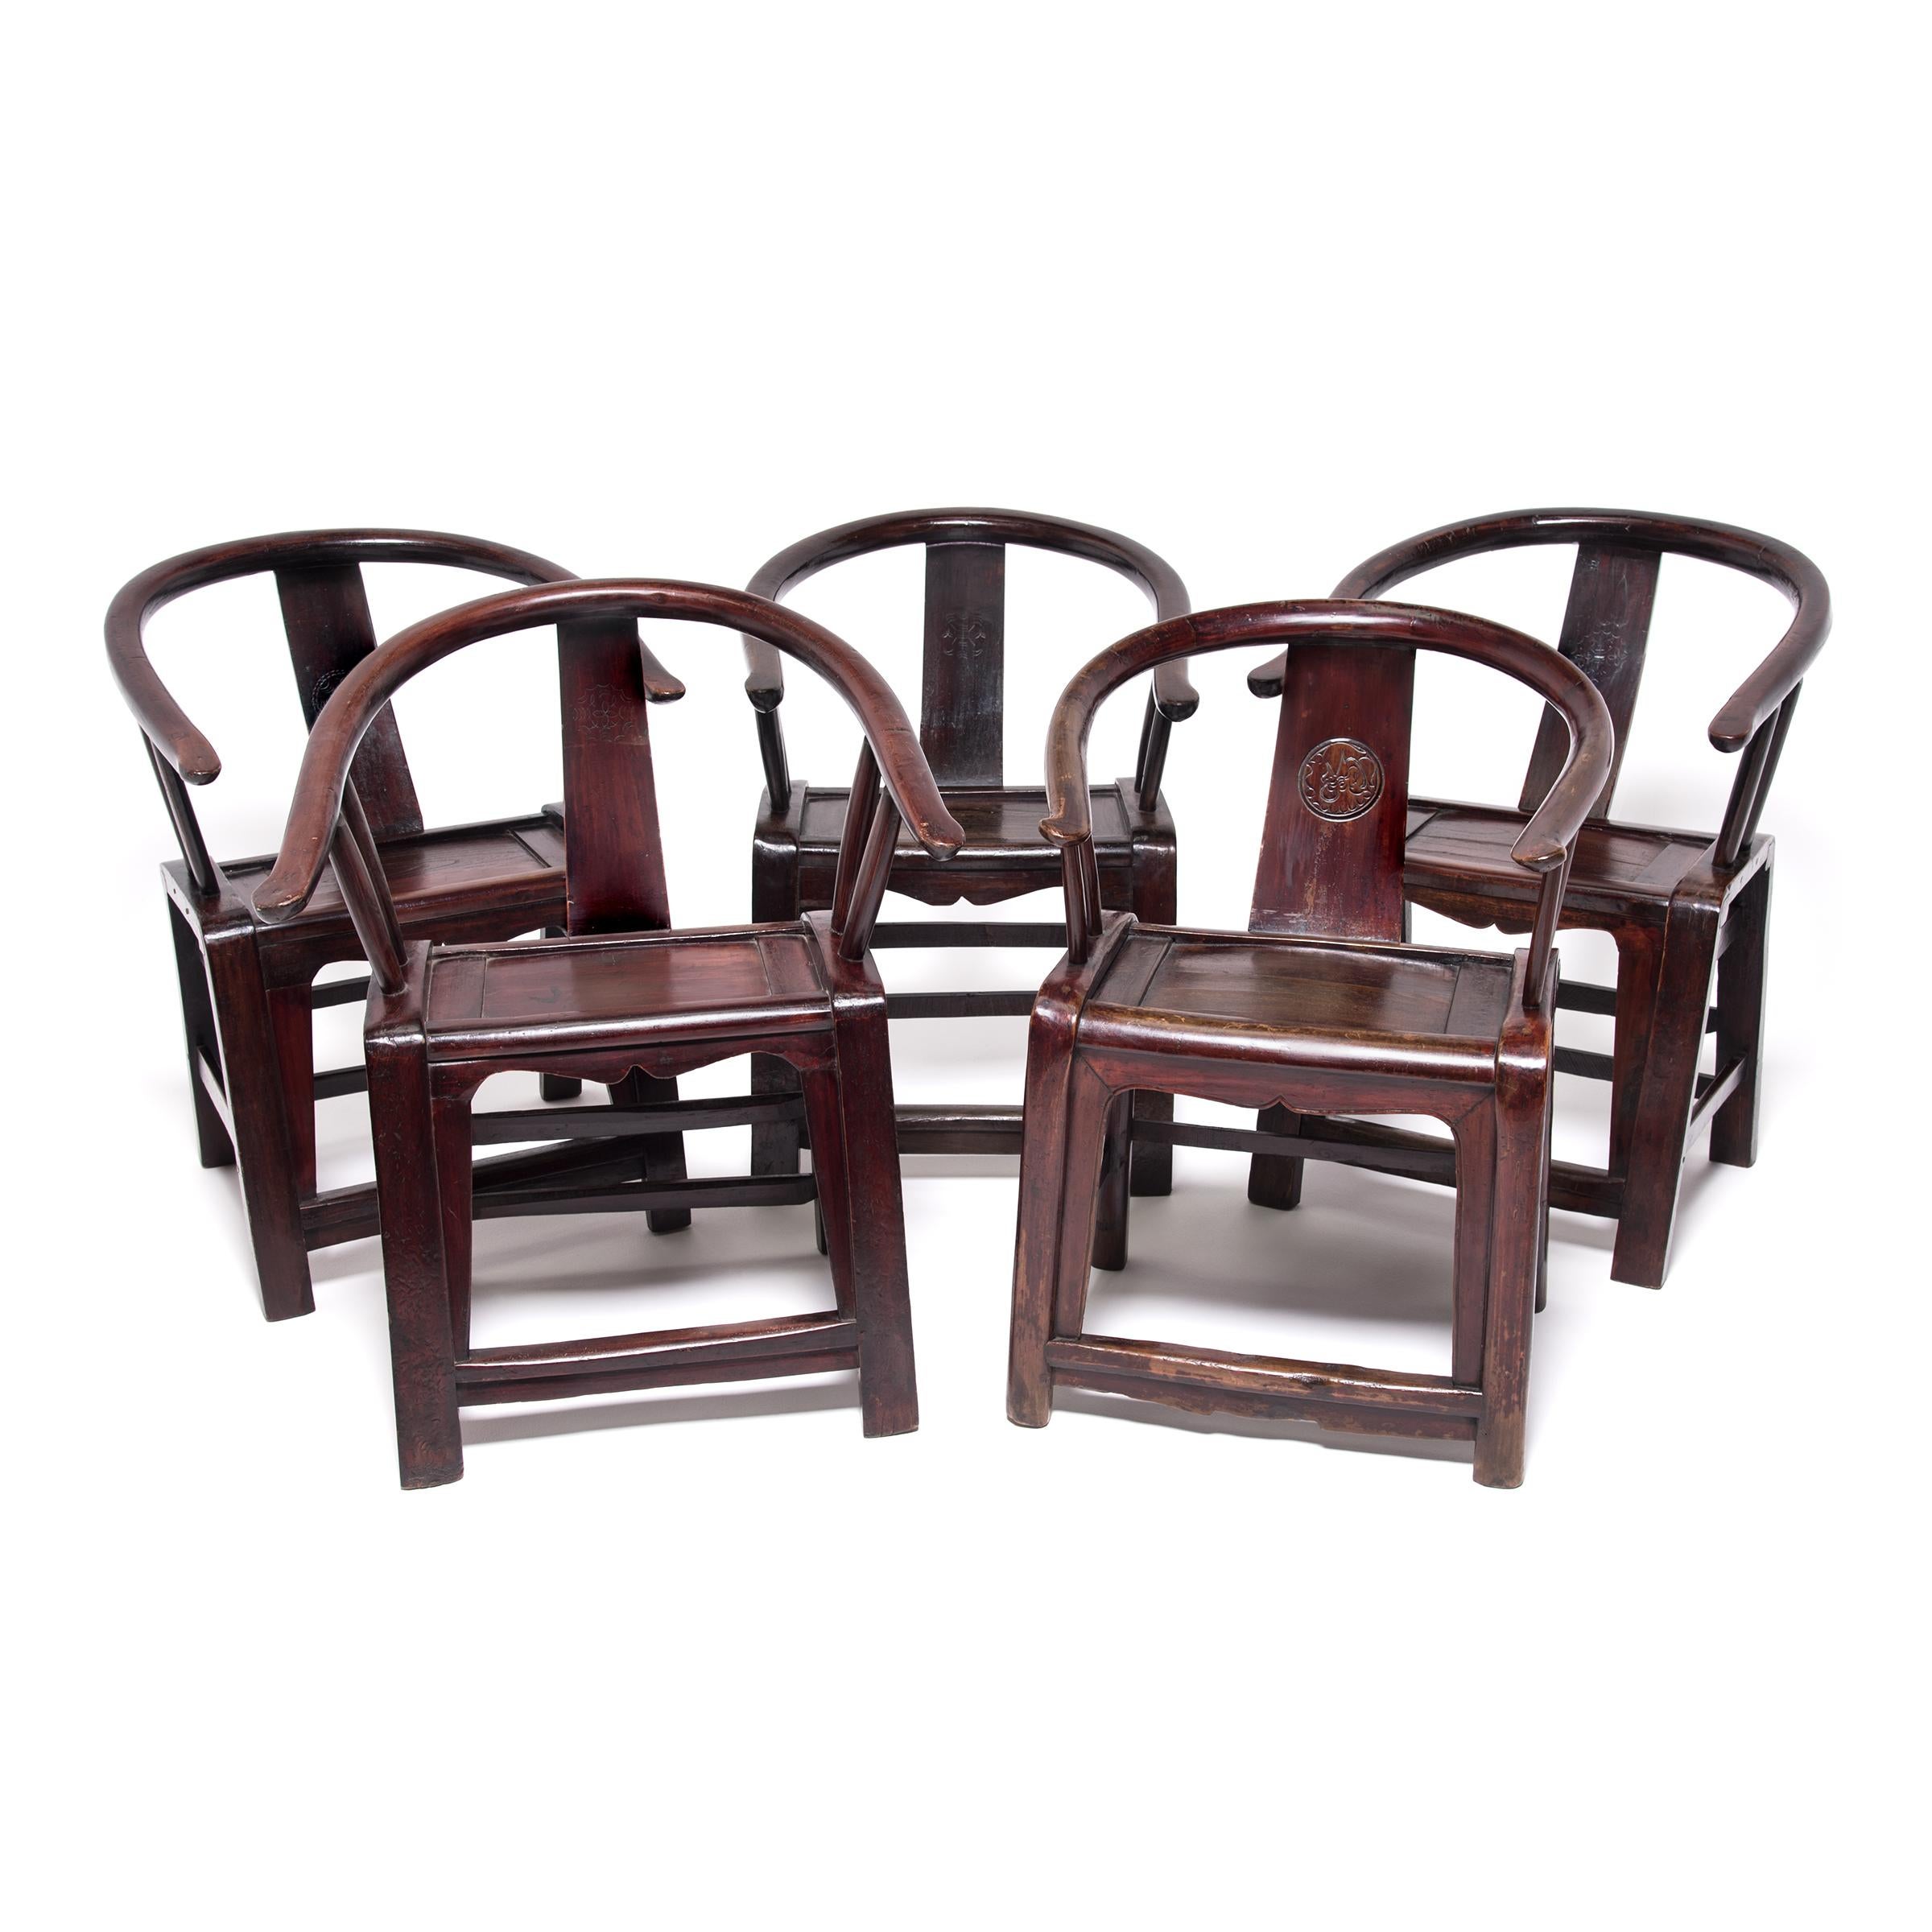 19th Century Chinese Provincial Round Back Chair, c. 1850 For Sale